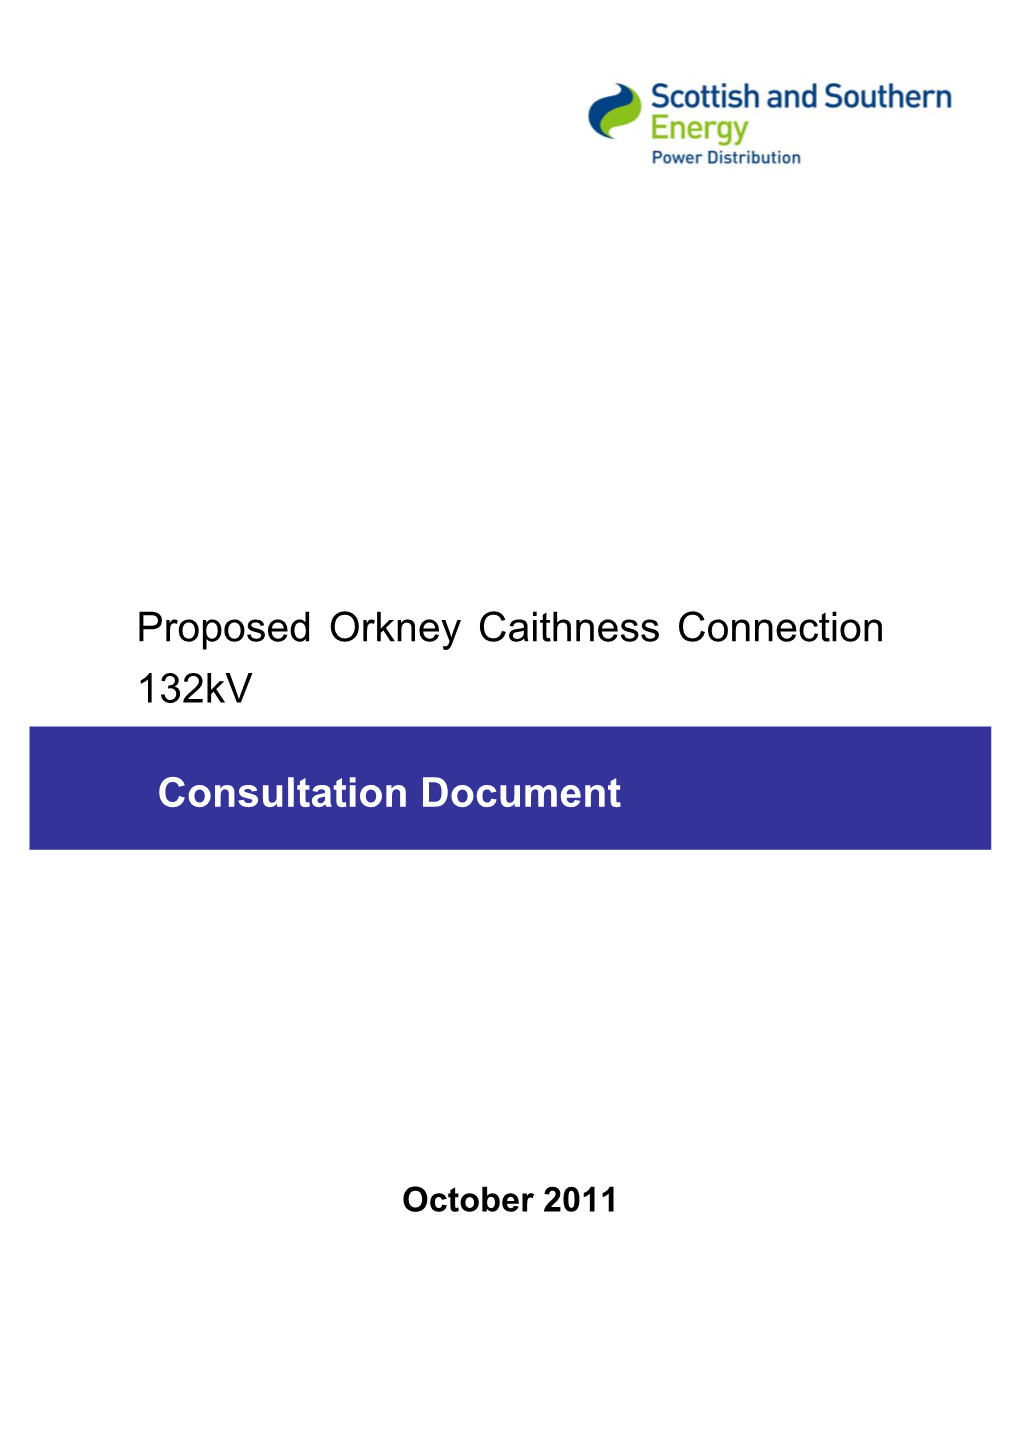 Proposed Orkney Caithness Connection 132Kv Consultation